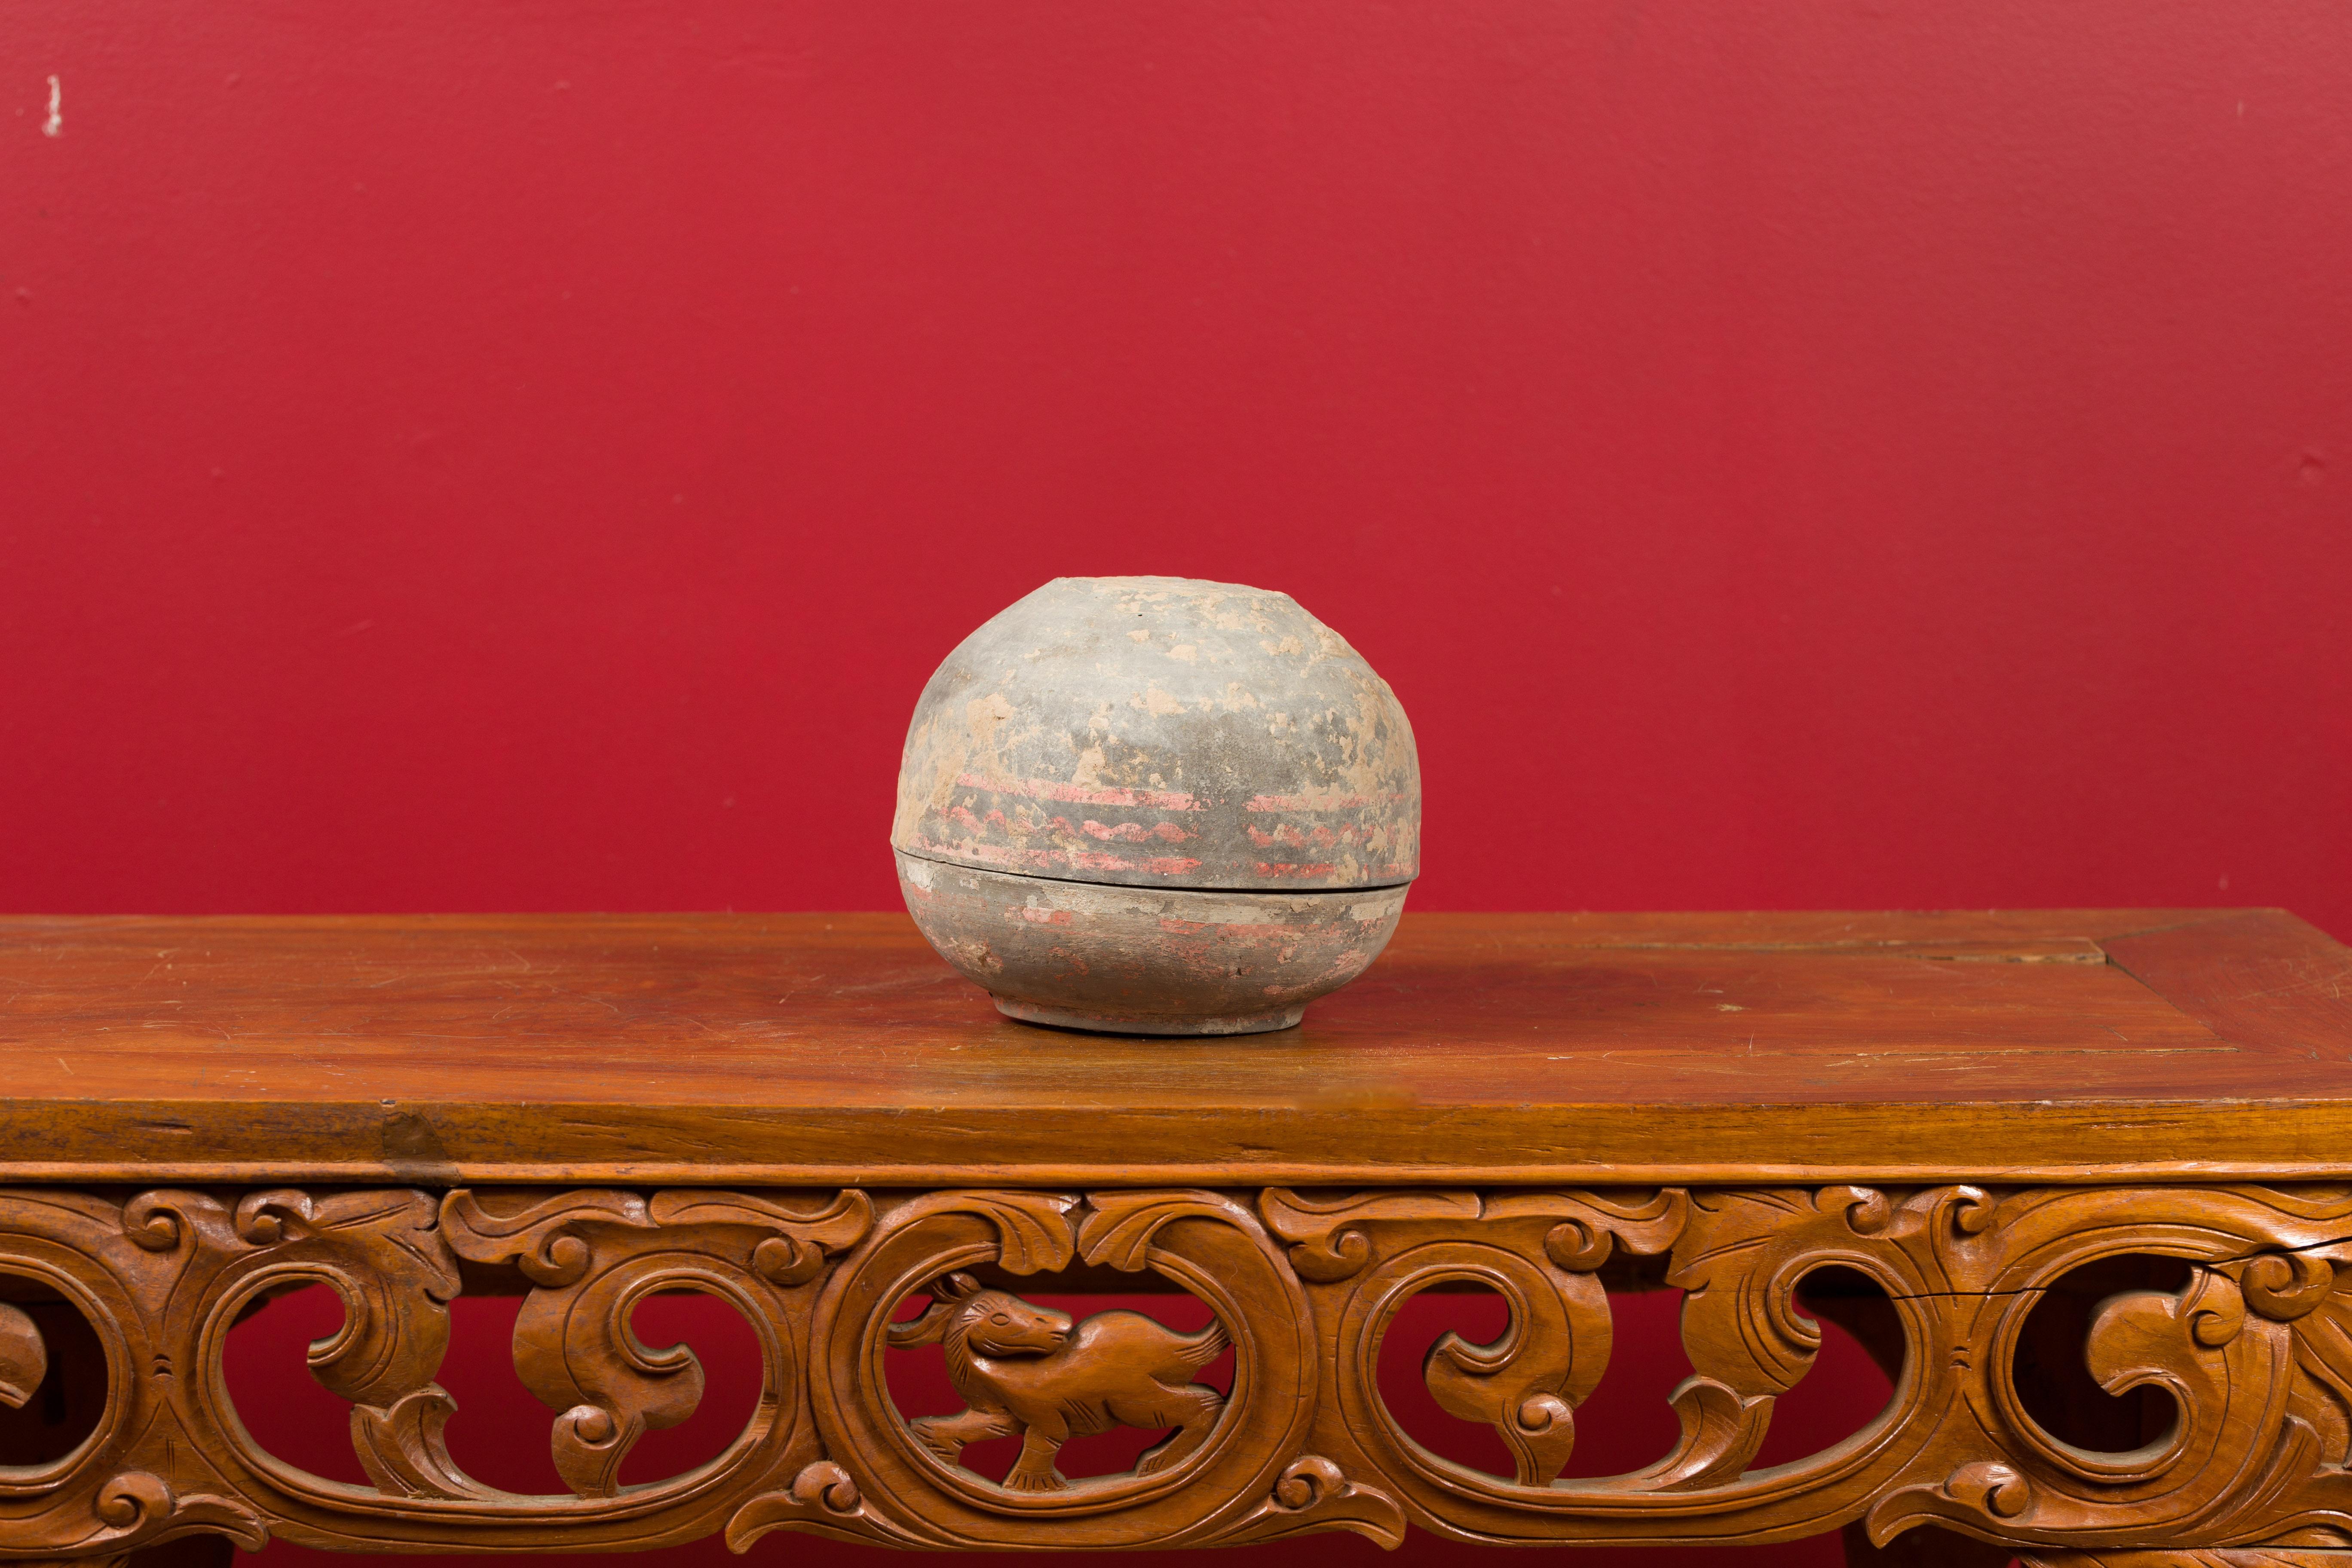 A petite Chinese Han dynasty circular lidded vessel with traces of original paint, circa 202 BC-200 AD. Handcrafted in China during the prestigious Han dynasty, this small terracotta vessel features a circular shape topped with a matching lid.